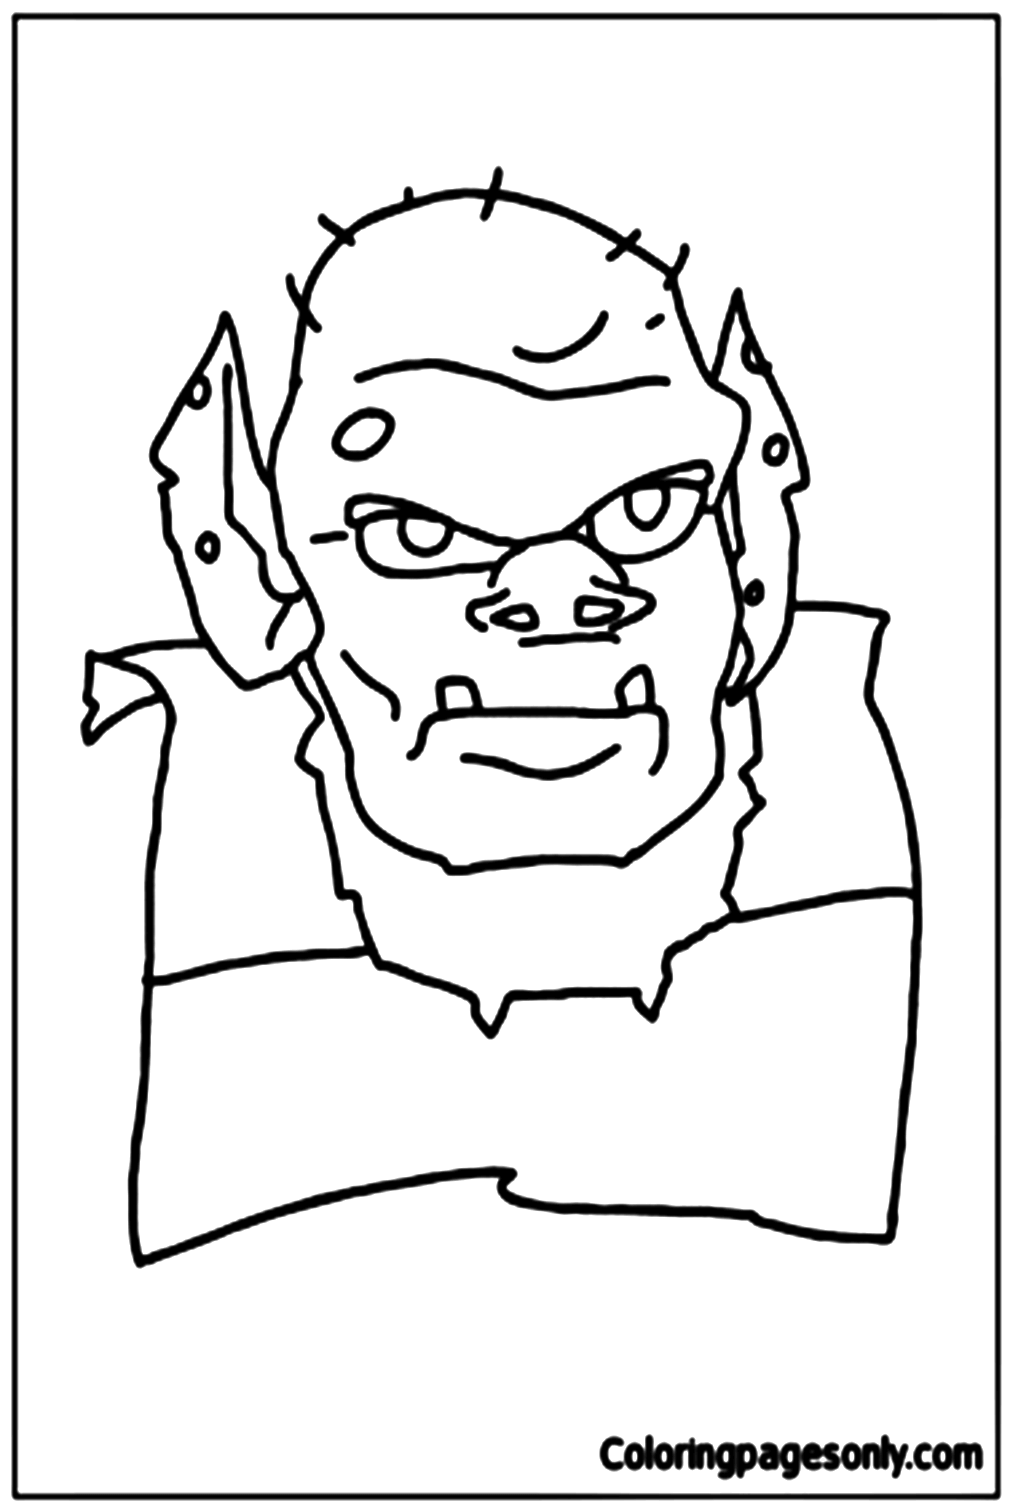 Ogre Face Coloring Page